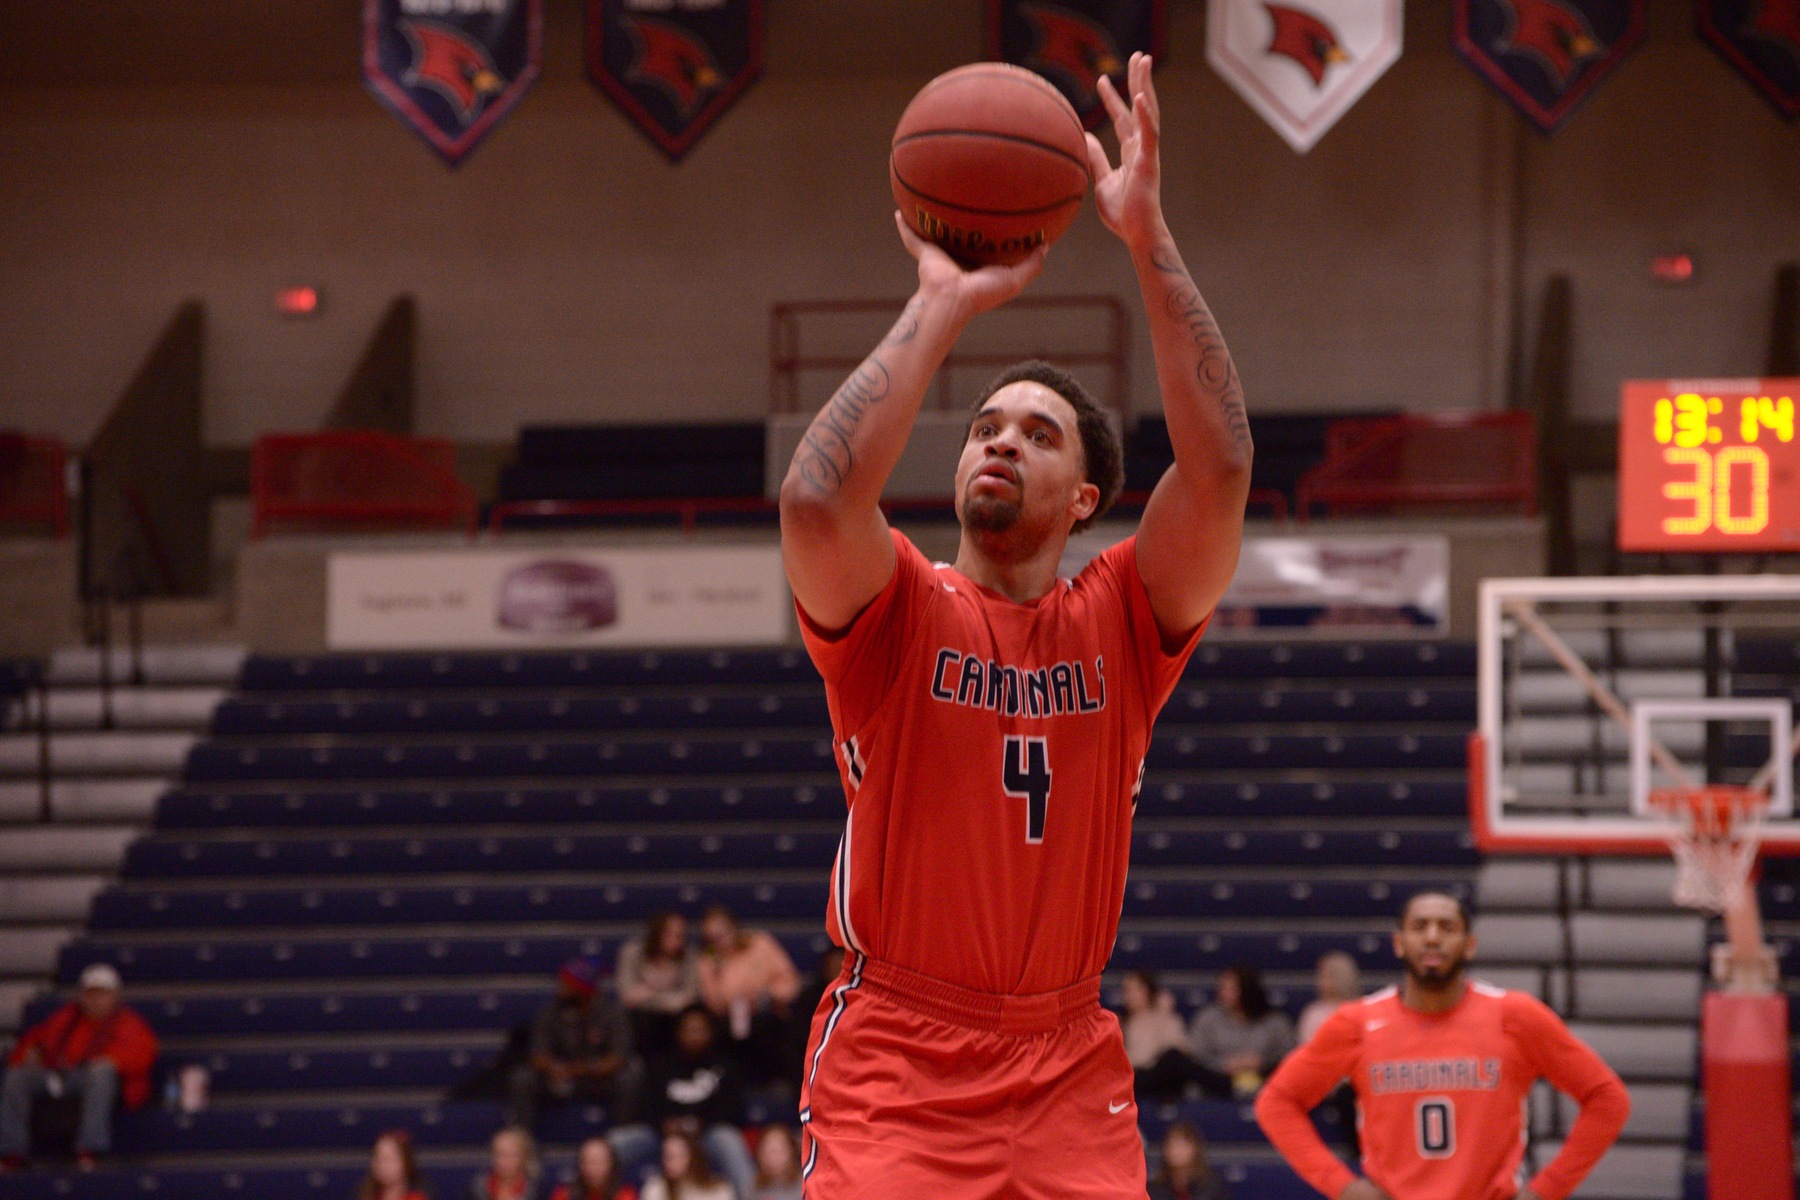 Cardinals not enough for Lakers in second half; fall 81-64 in GLIAC matchup